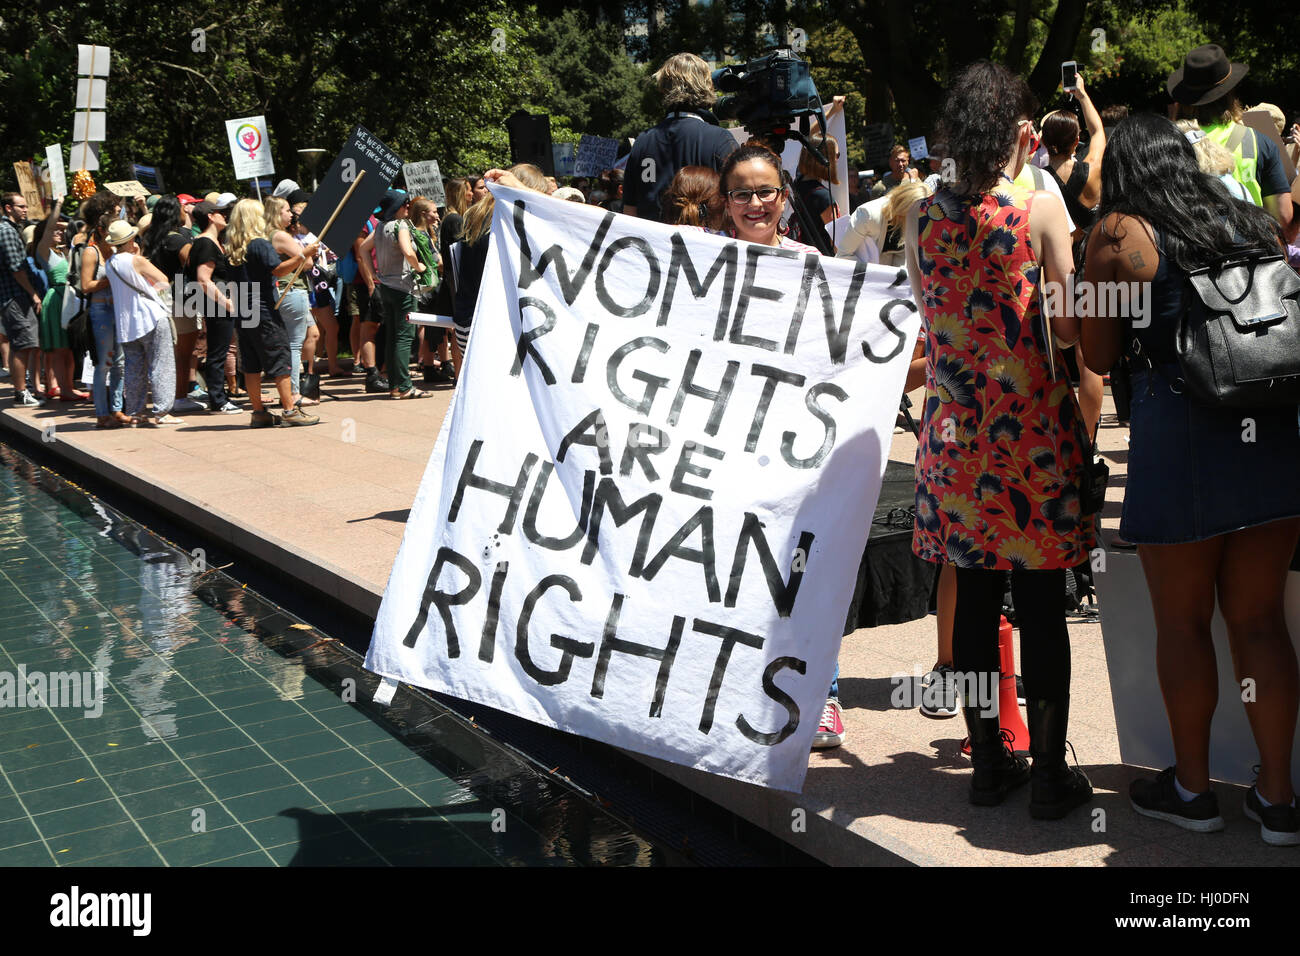 Sydney, Australia. 21 January 2017. Thousands of mainly women gathered in Hyde Park and marched to Martin Place in solidarity with the Women's March movement taking place in Washington, DC and around the world in defence of women’s rights and human rights. Pictured: banner says, ‘women’s rights are human rights’. Credit: © Richard Milnes/Alamy Live News Stock Photo